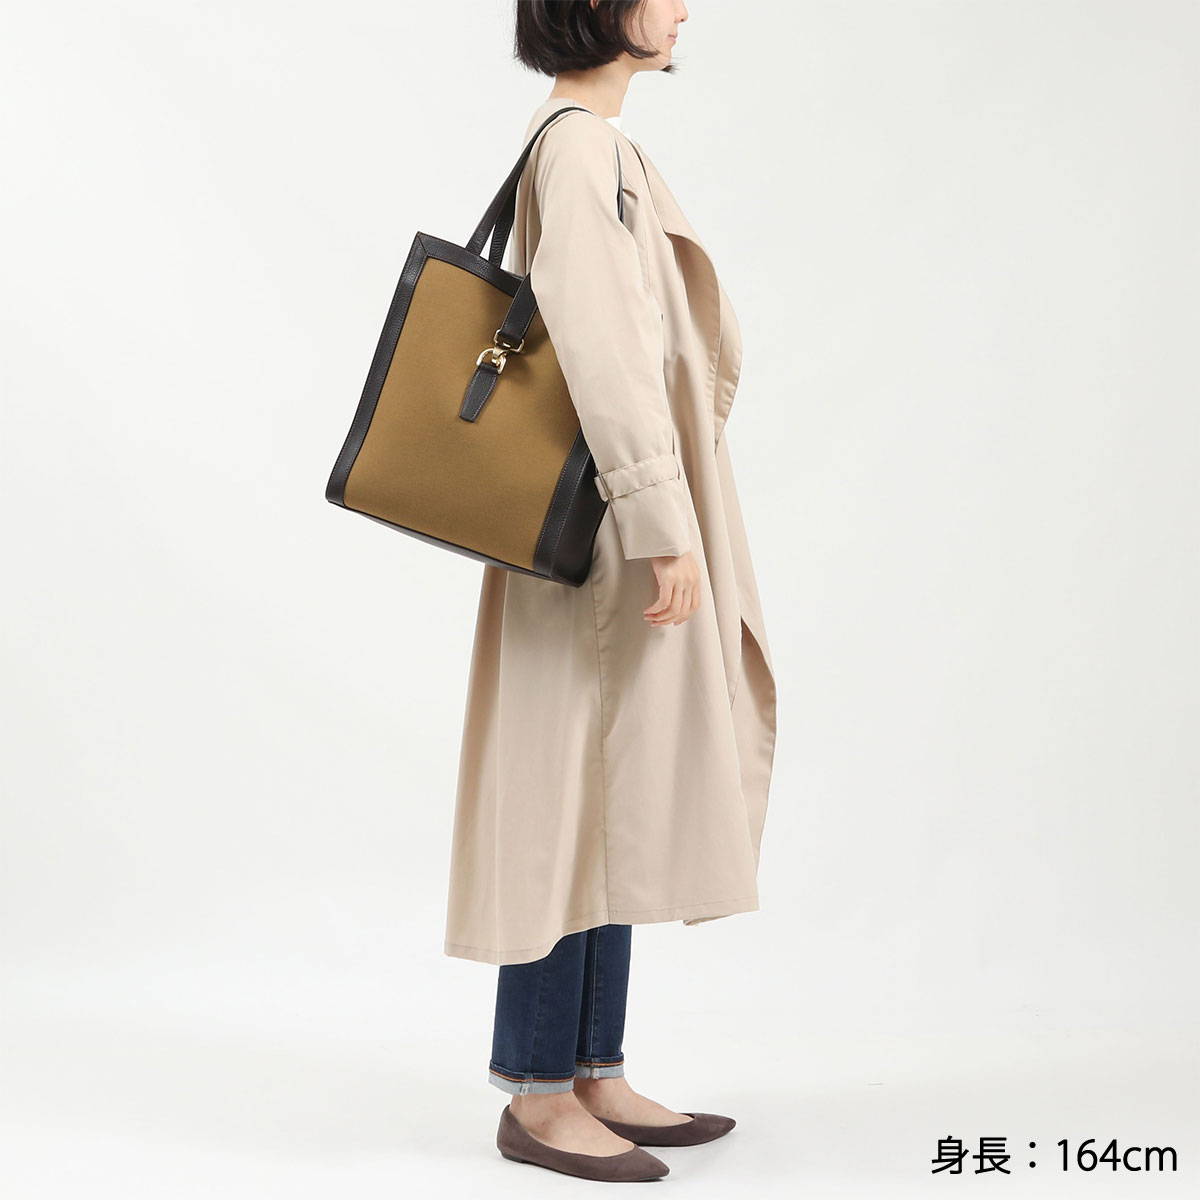 S.MANO エスマーノ VERTICAL TOTE トートバッグ｜【正規販売店】カバン 